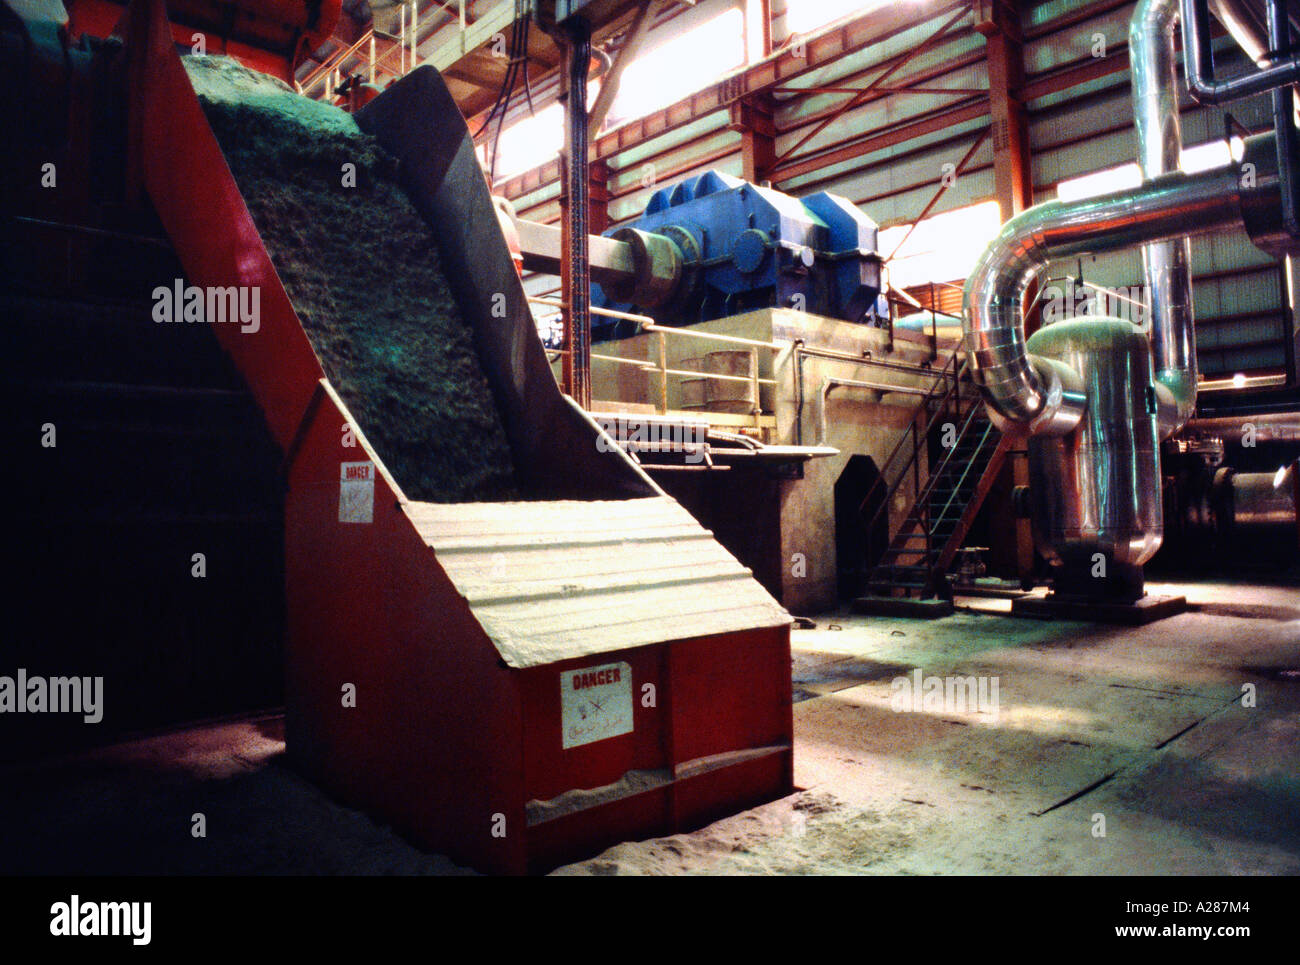 Kenana Sudan Sugar Factory 3rd Largest in World - Cane Going into Crusher Machine Stock Photo